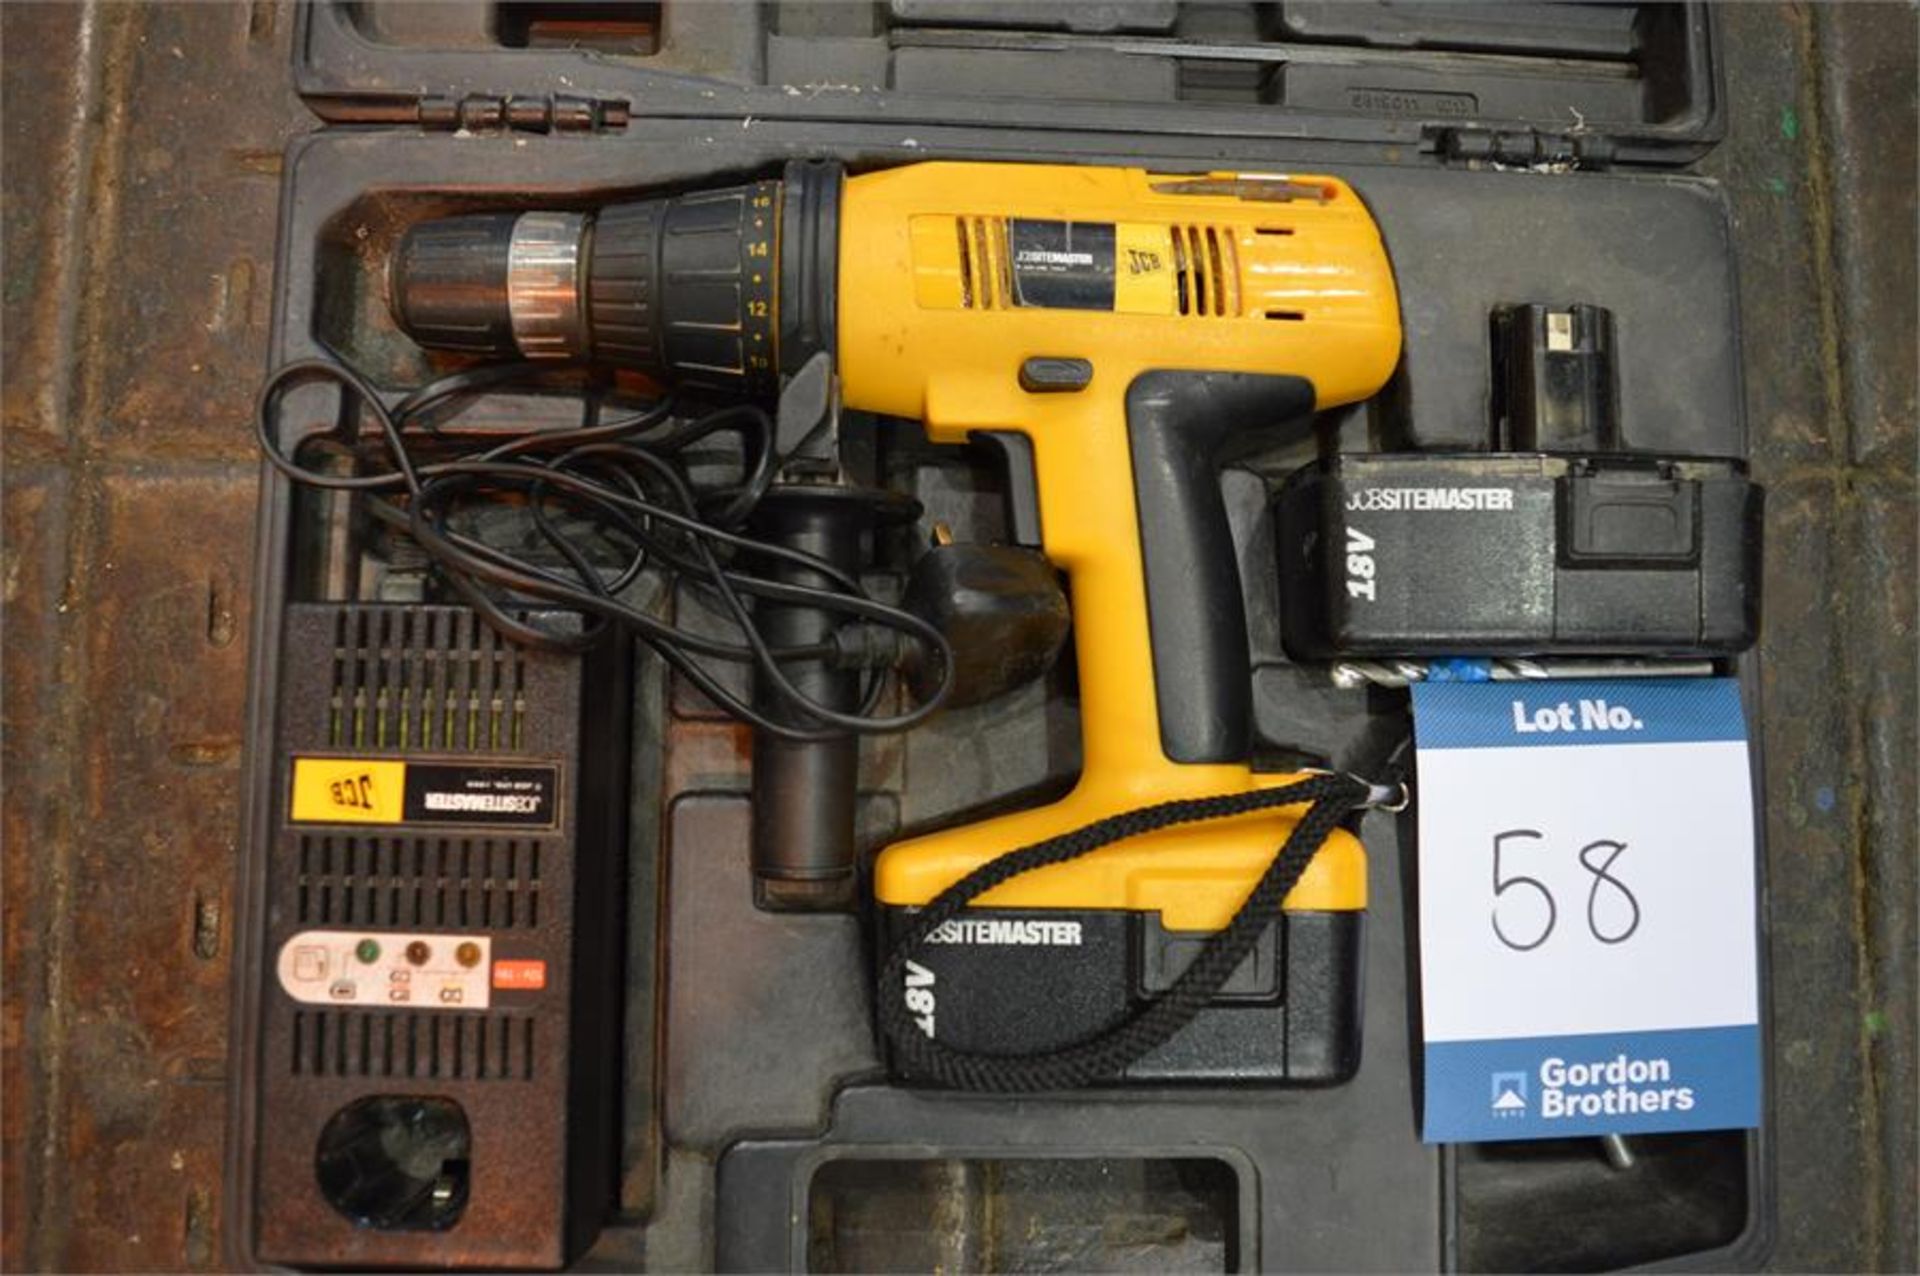 JCB, Site Master, JCBS-18CDC 18v cordless drill, Serial No. PD07435 with spare 18v battery,